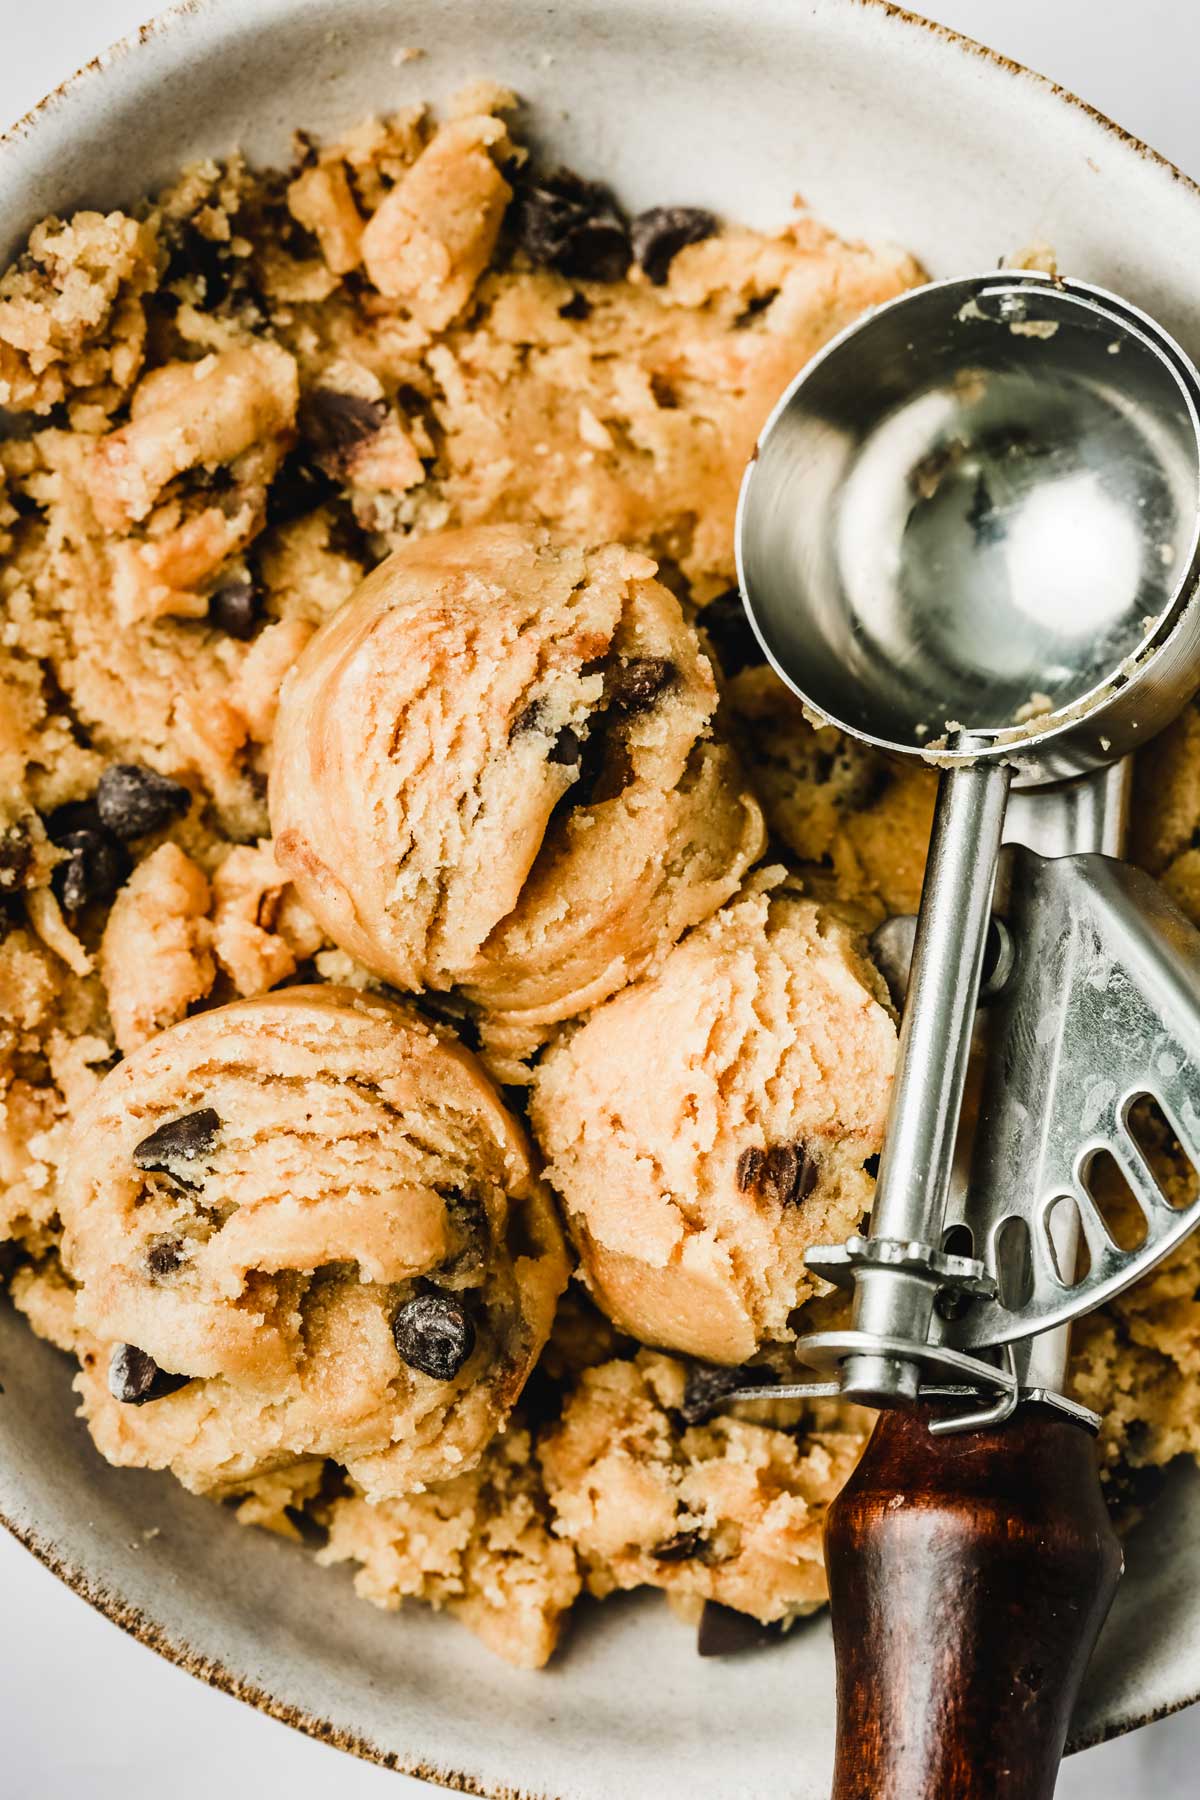 Bowl with ice cream scoop and cookie dough